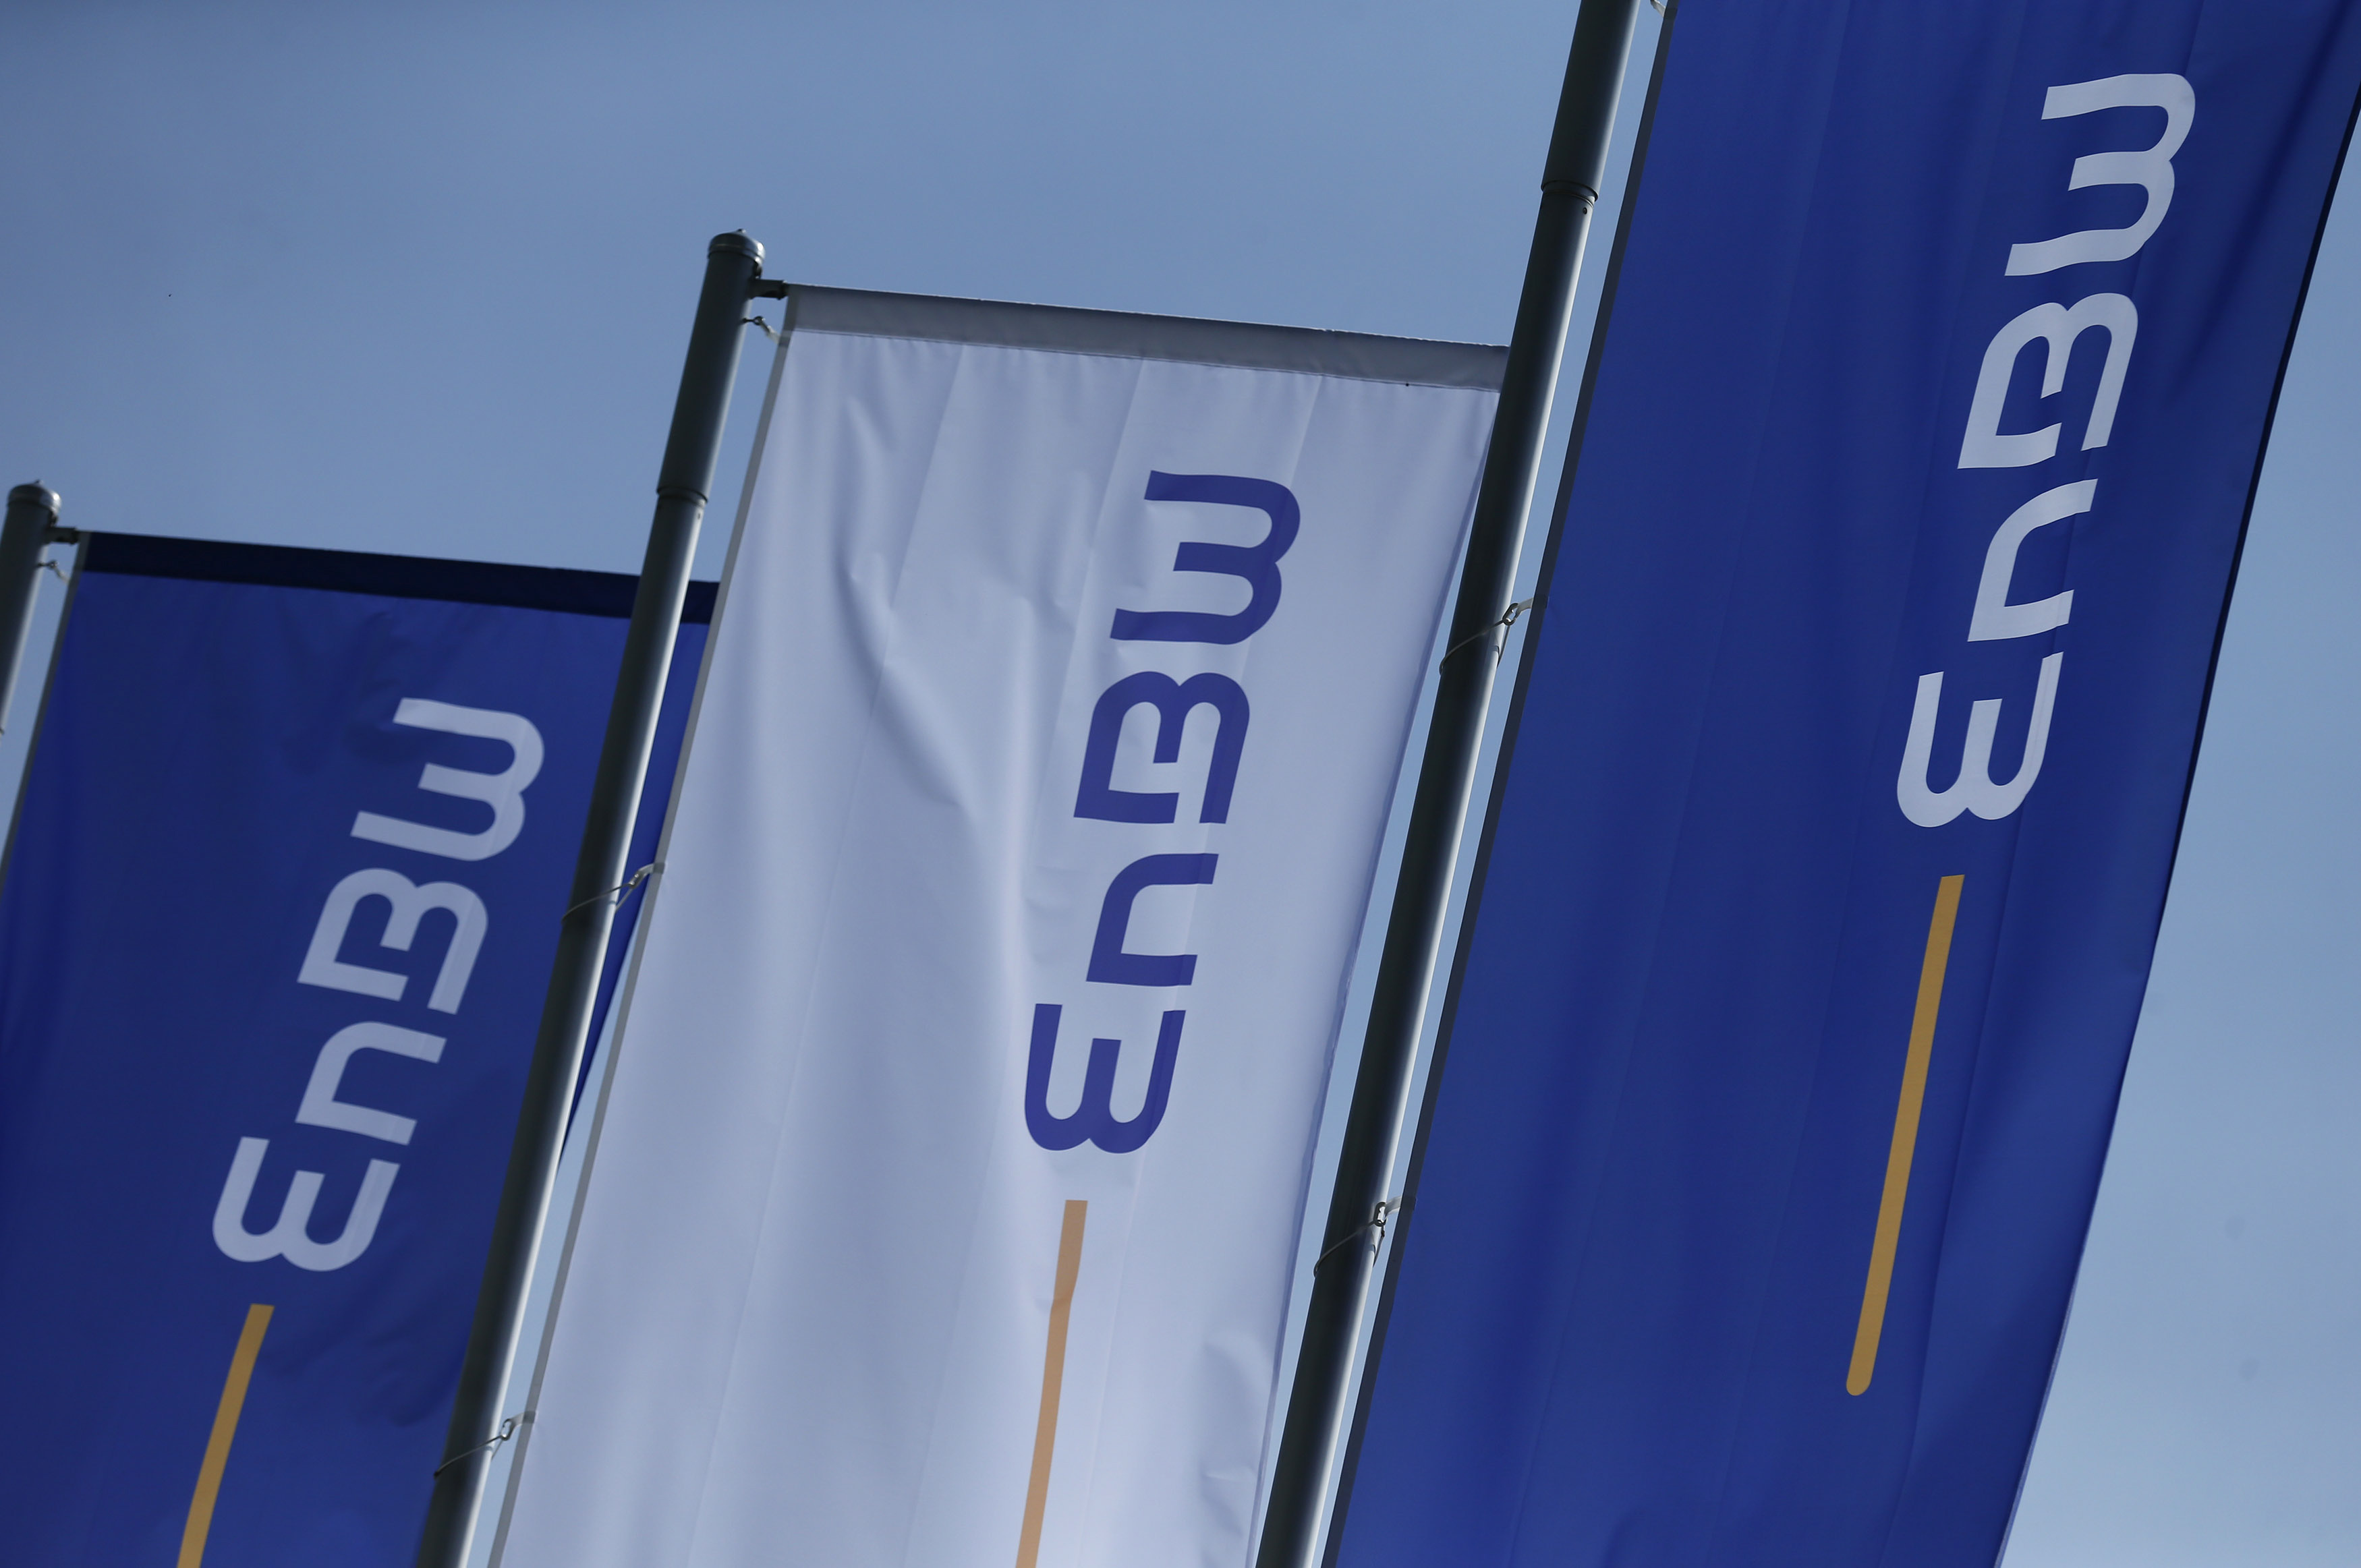 Flags of German power supplier EnBW Energie Baden-Wuertemberg AG are pictured at the company's headquarters in Karlsruhe